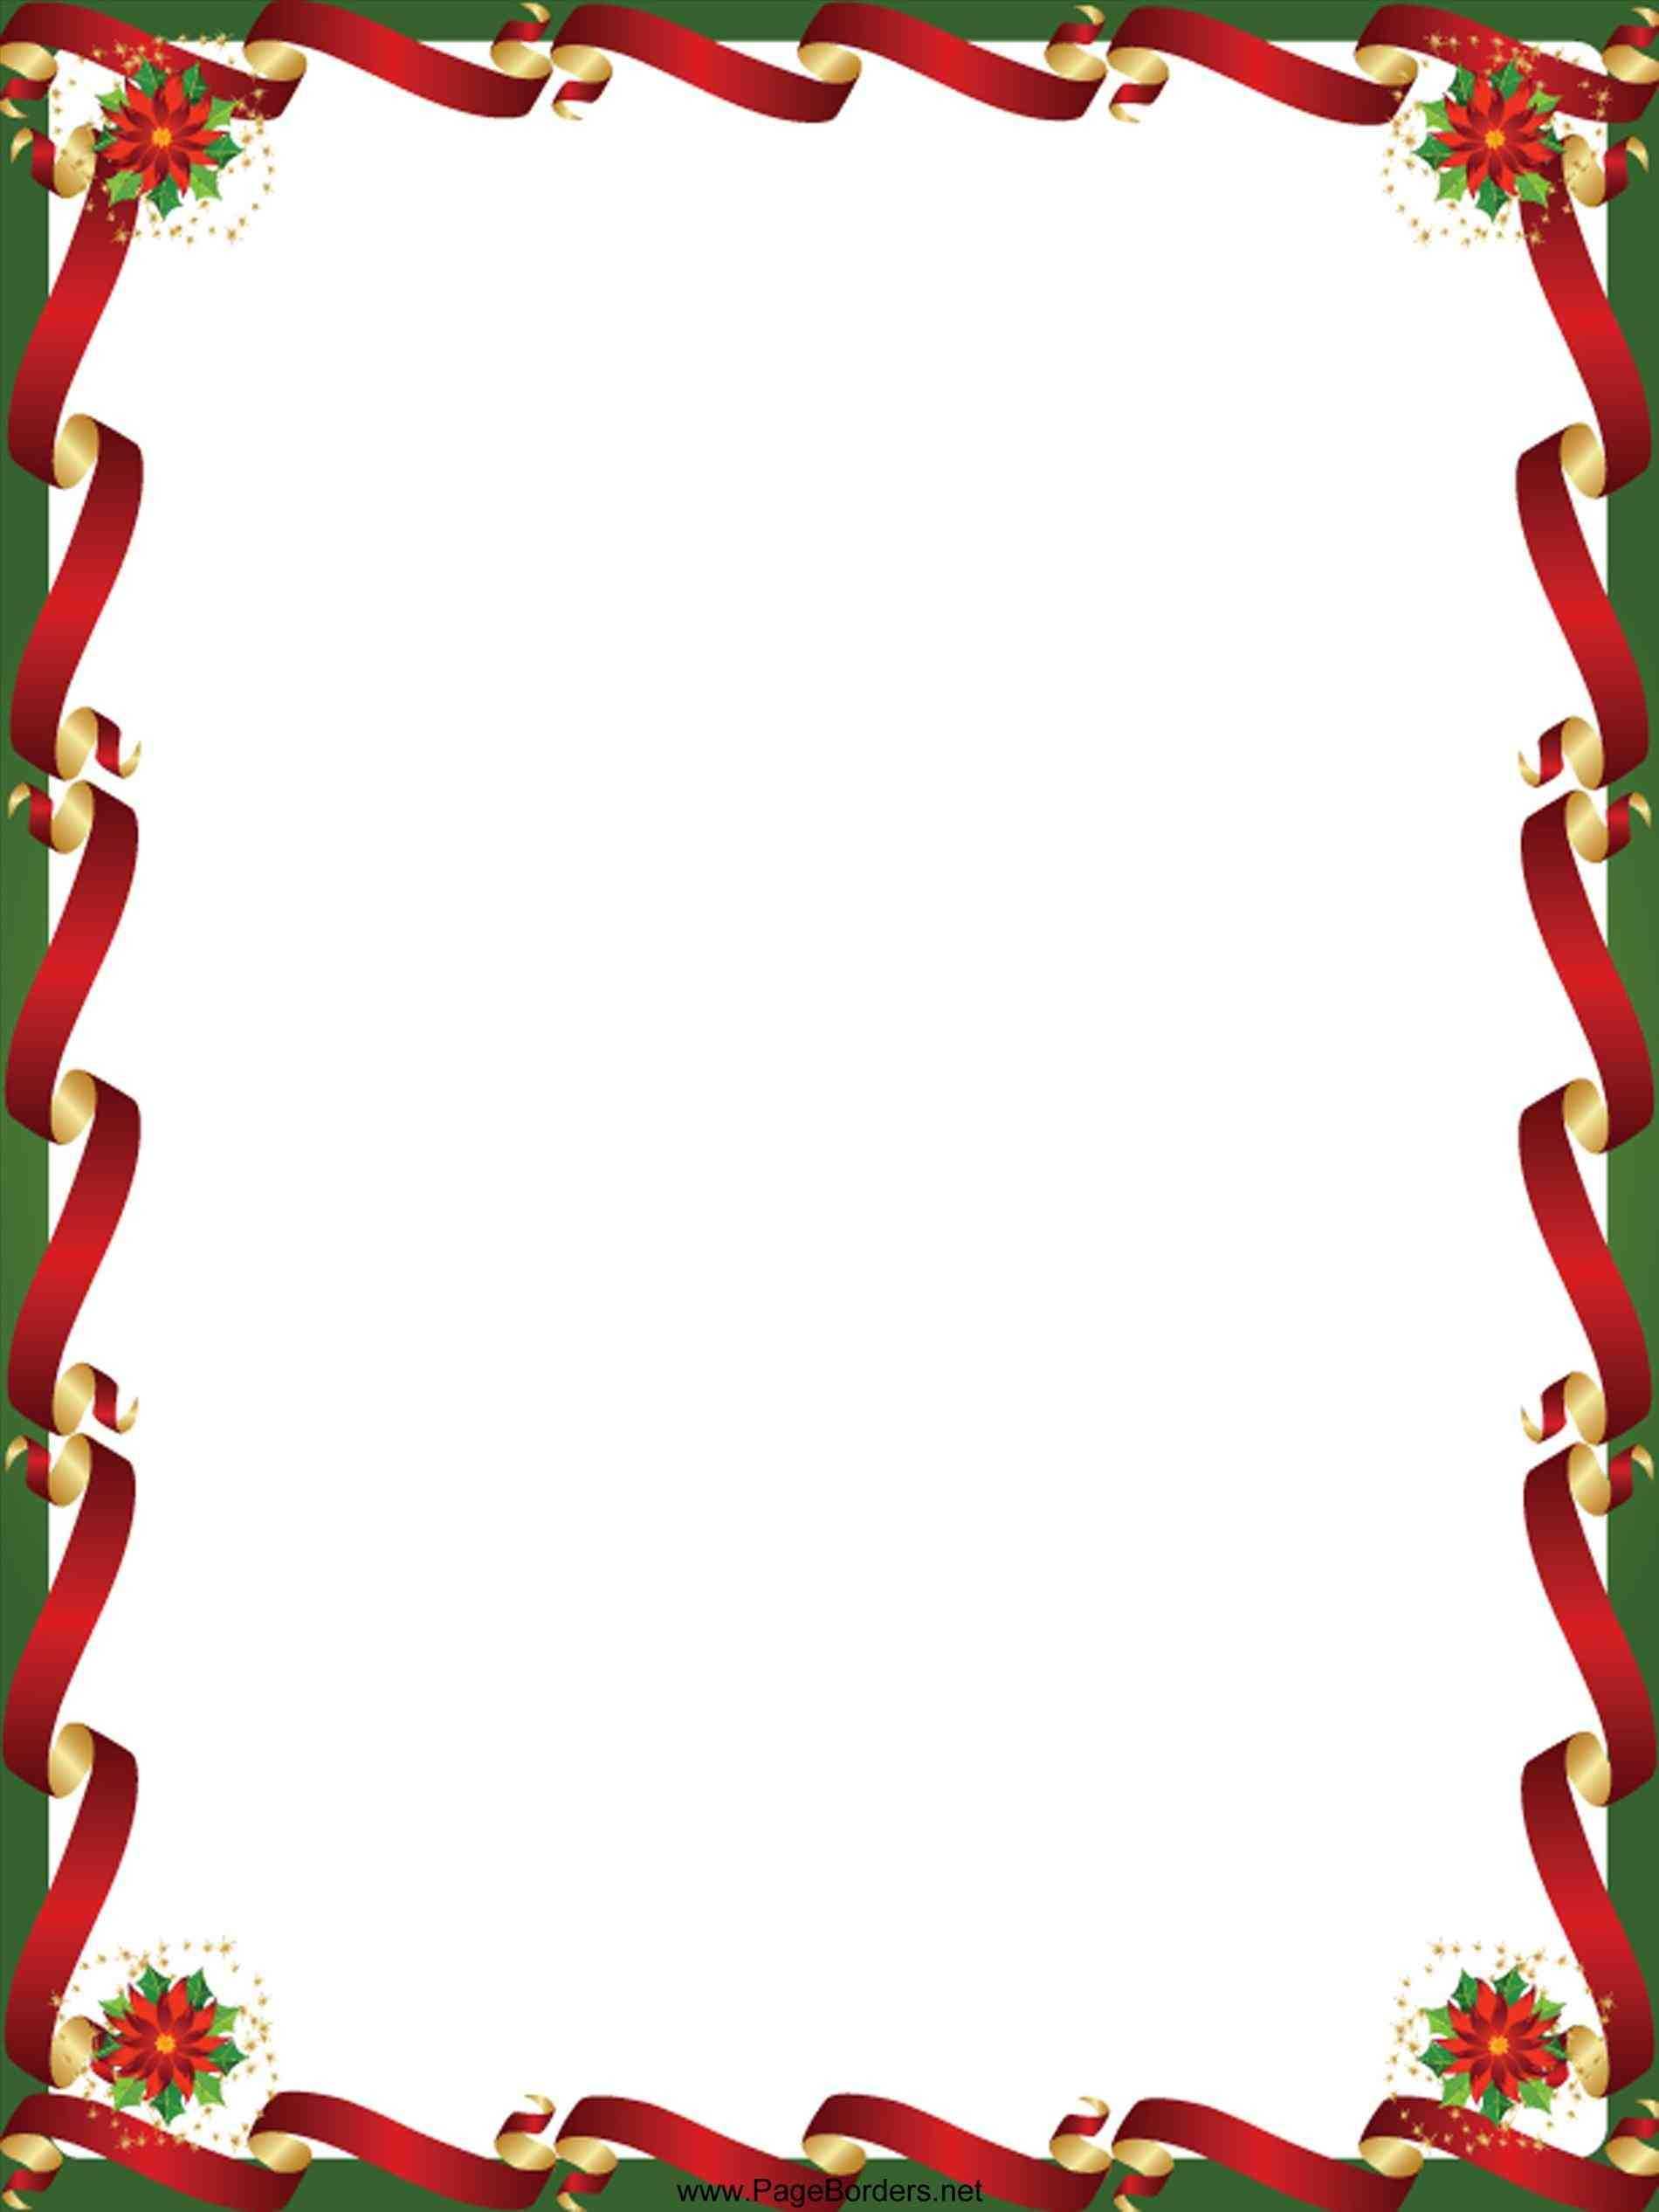 Border Clipart Downloadable Free Christmas Border Templates Inside Word Border Templates Free Download